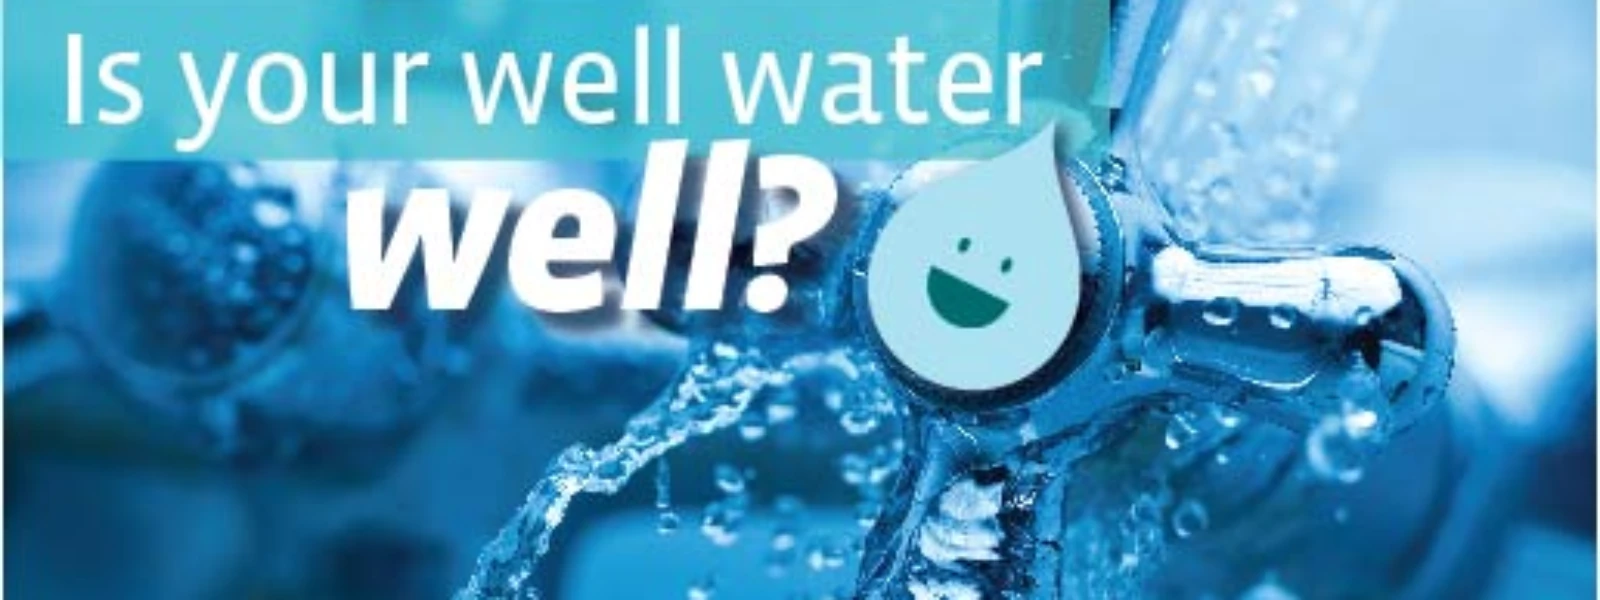 Well Water Test